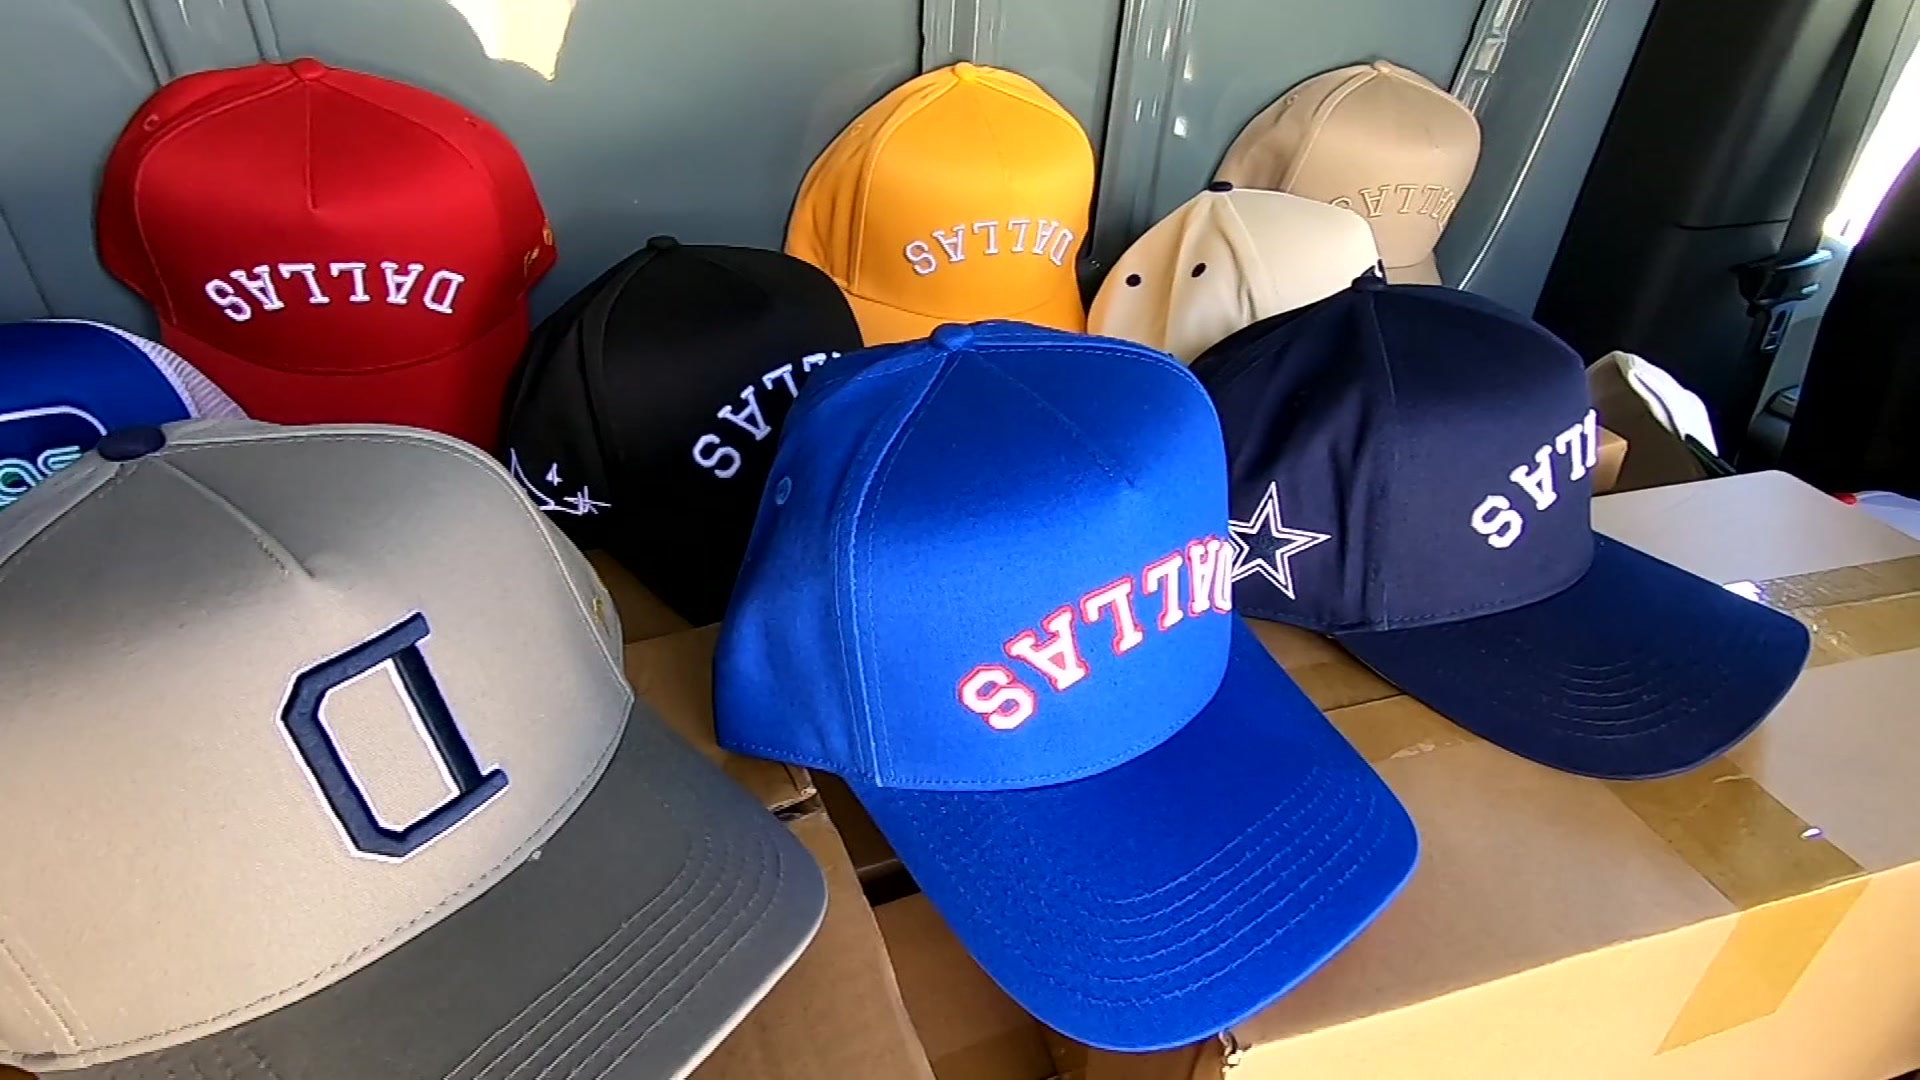 Our V2 classic upside down Dallas trucker hats. If you have one, comment  below on how they look and feel. #truebrvnd #dtx